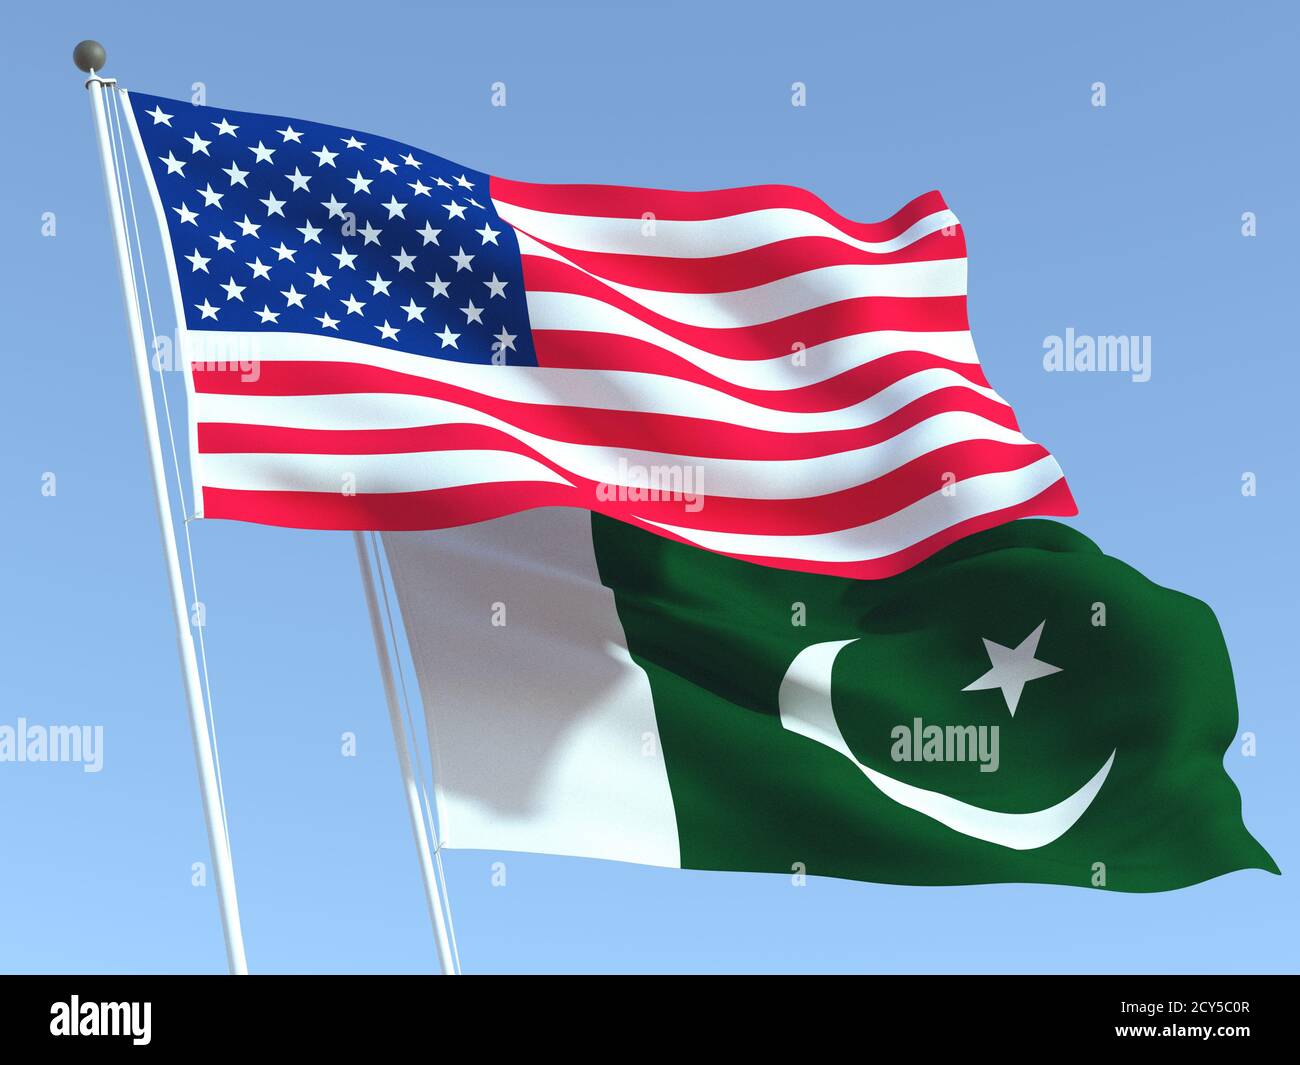 Two waving state flags of United States and Pakistan on the blue sky. High - quality business background. 3d illustration Stock Photo